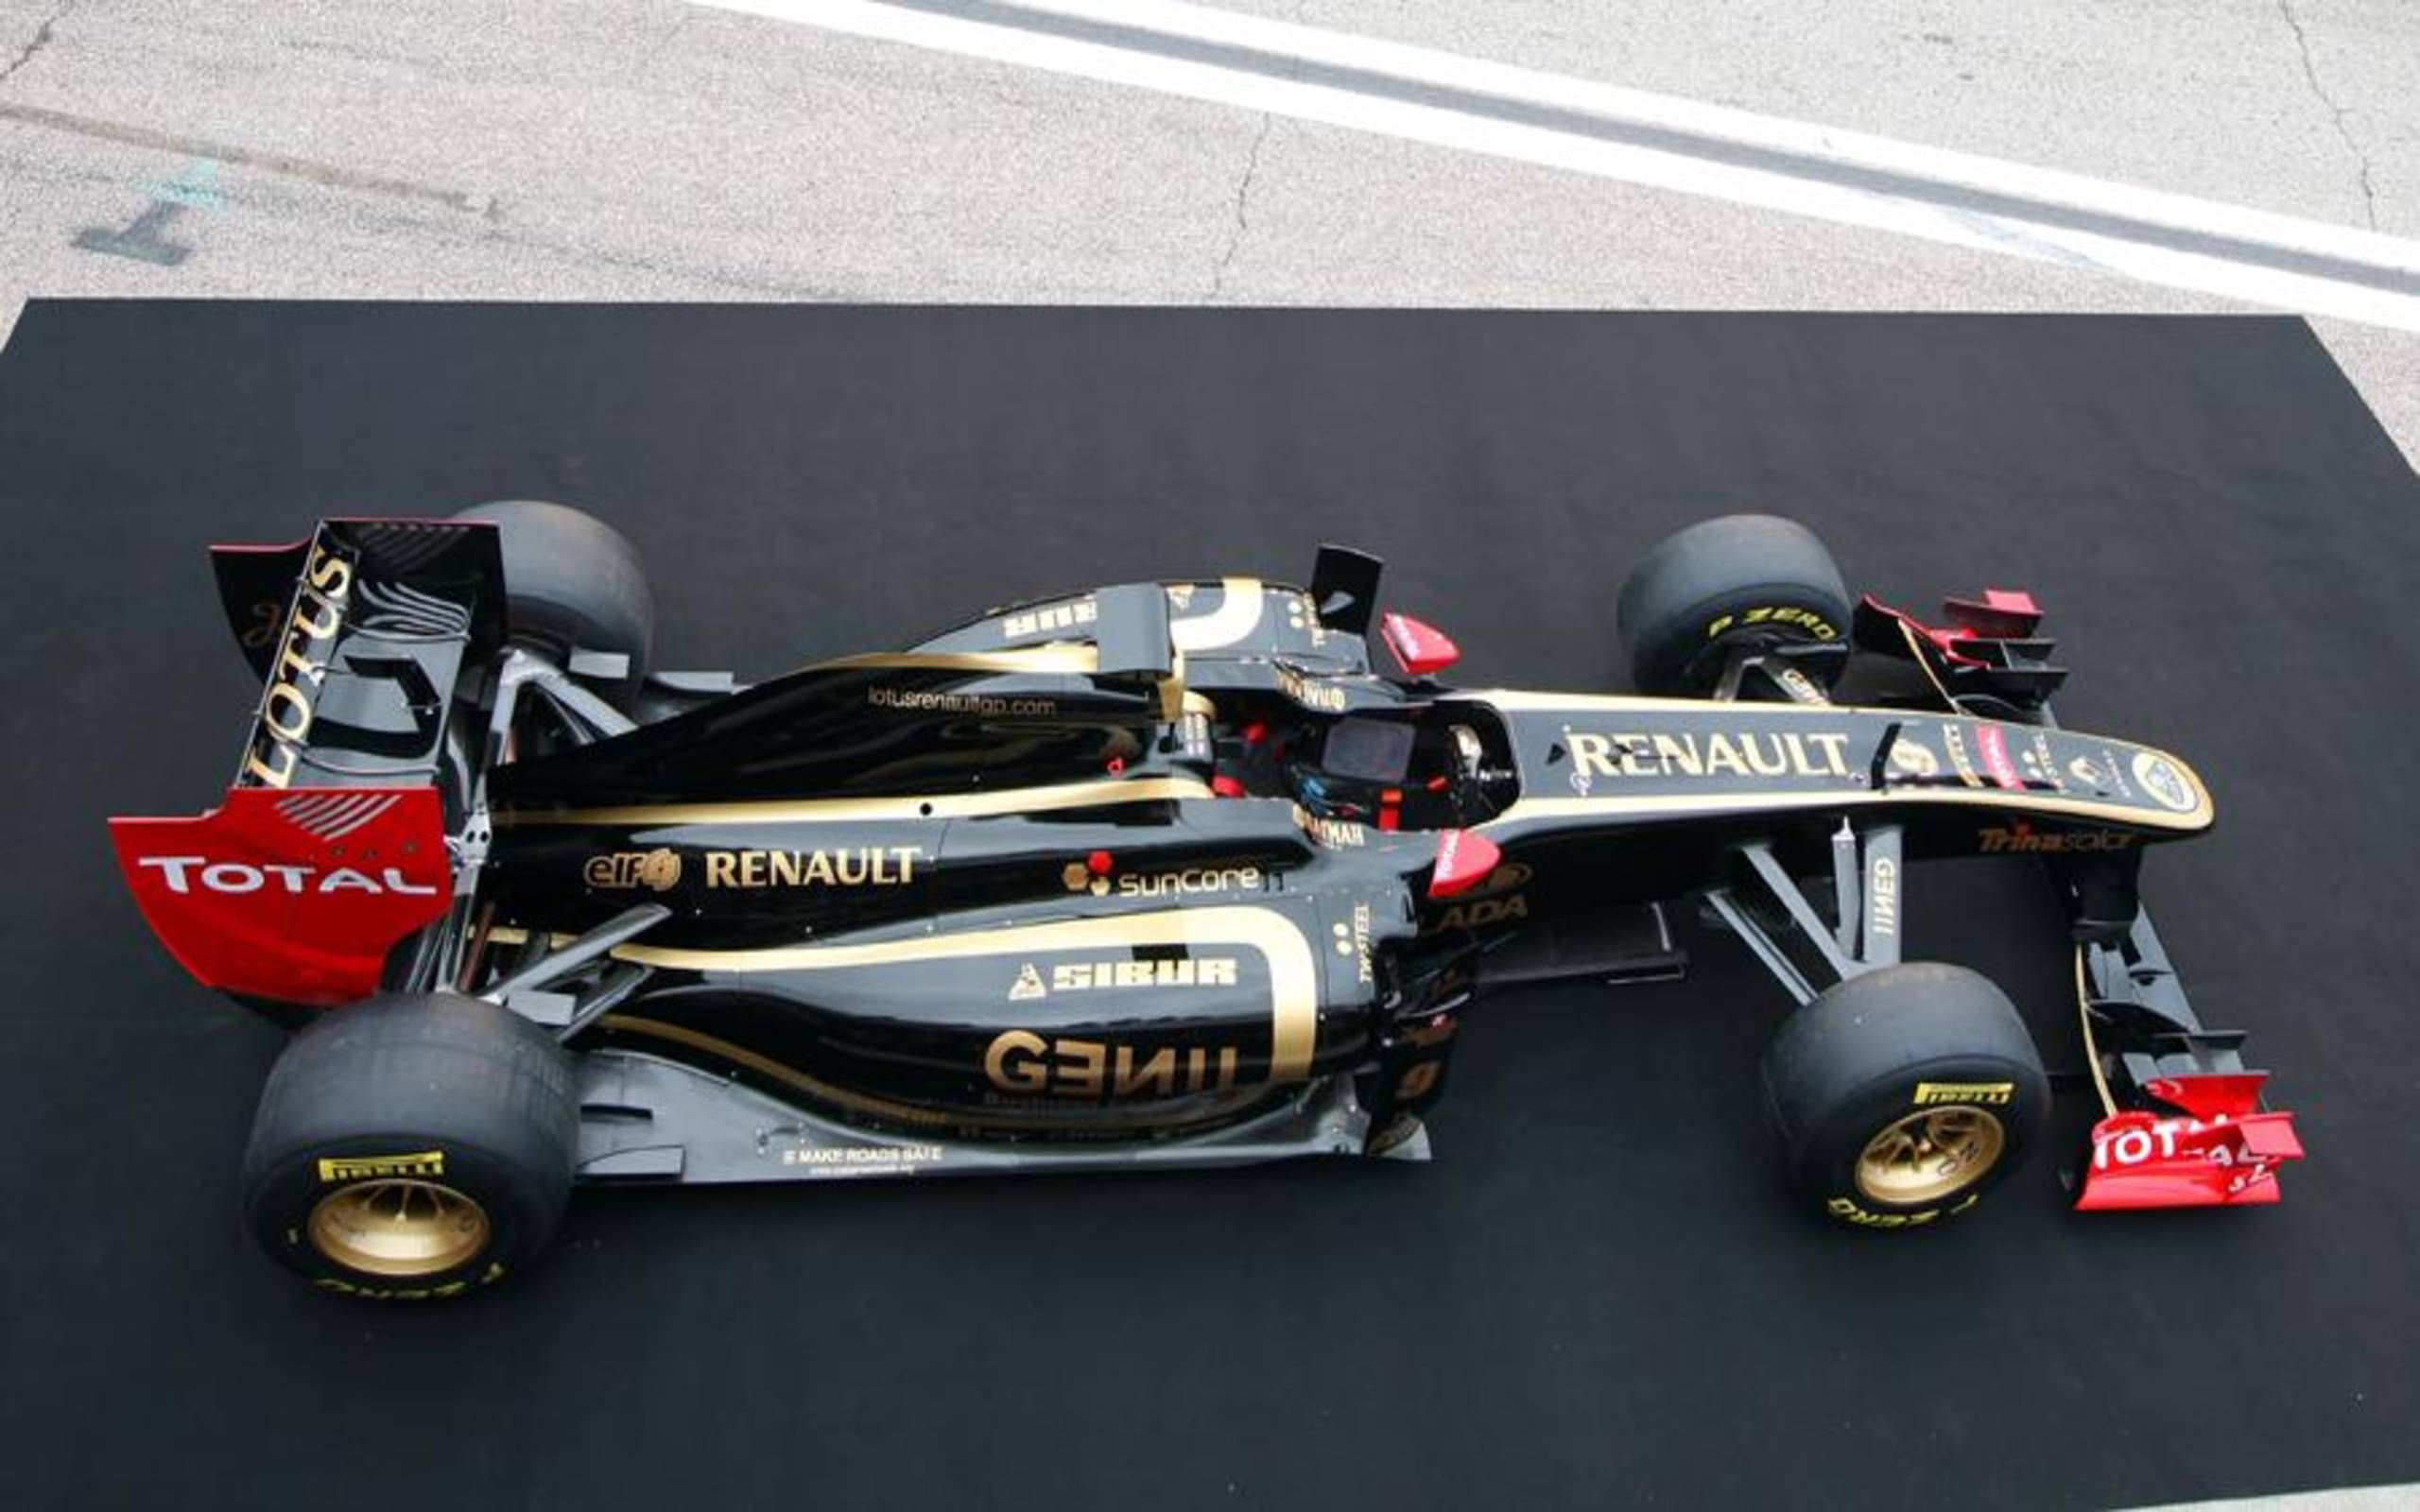 Formula One: Renault launches its R31 car